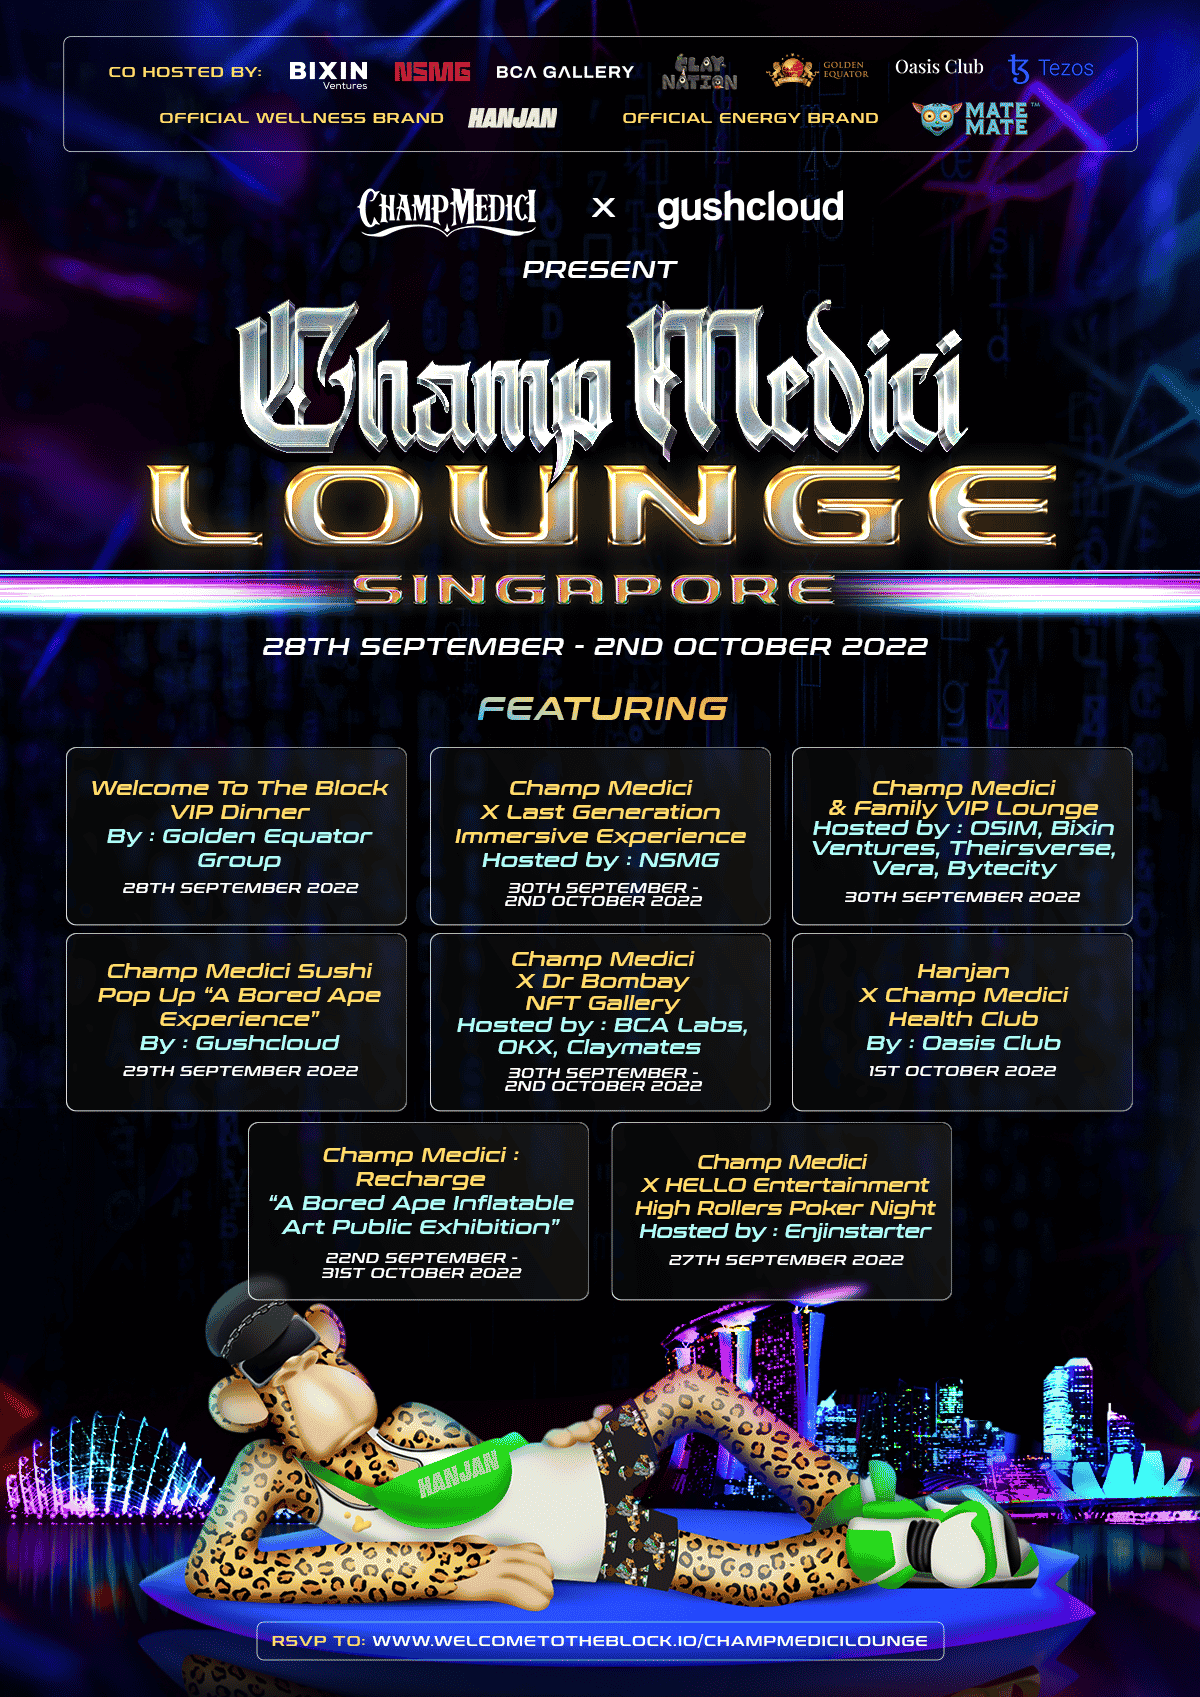 Image of the Champ Medici Lounge Event Singapore poster